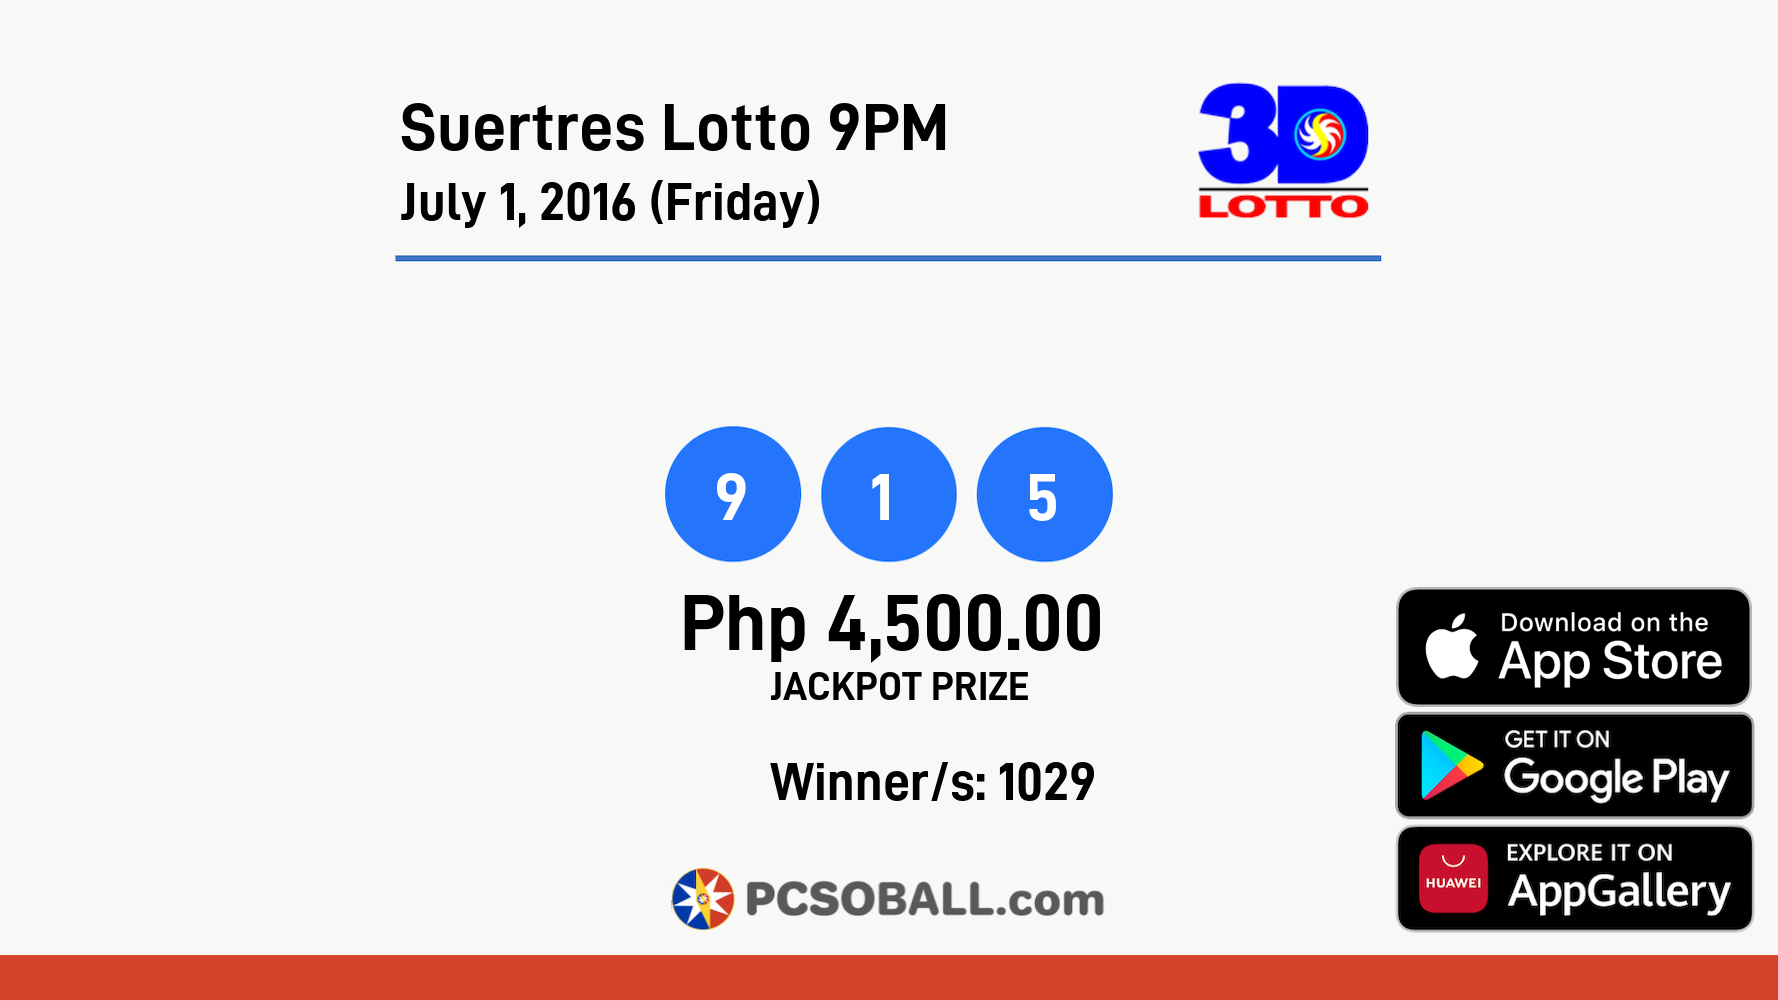 Suertres Lotto 9PM July 1, 2016 (Friday) Result